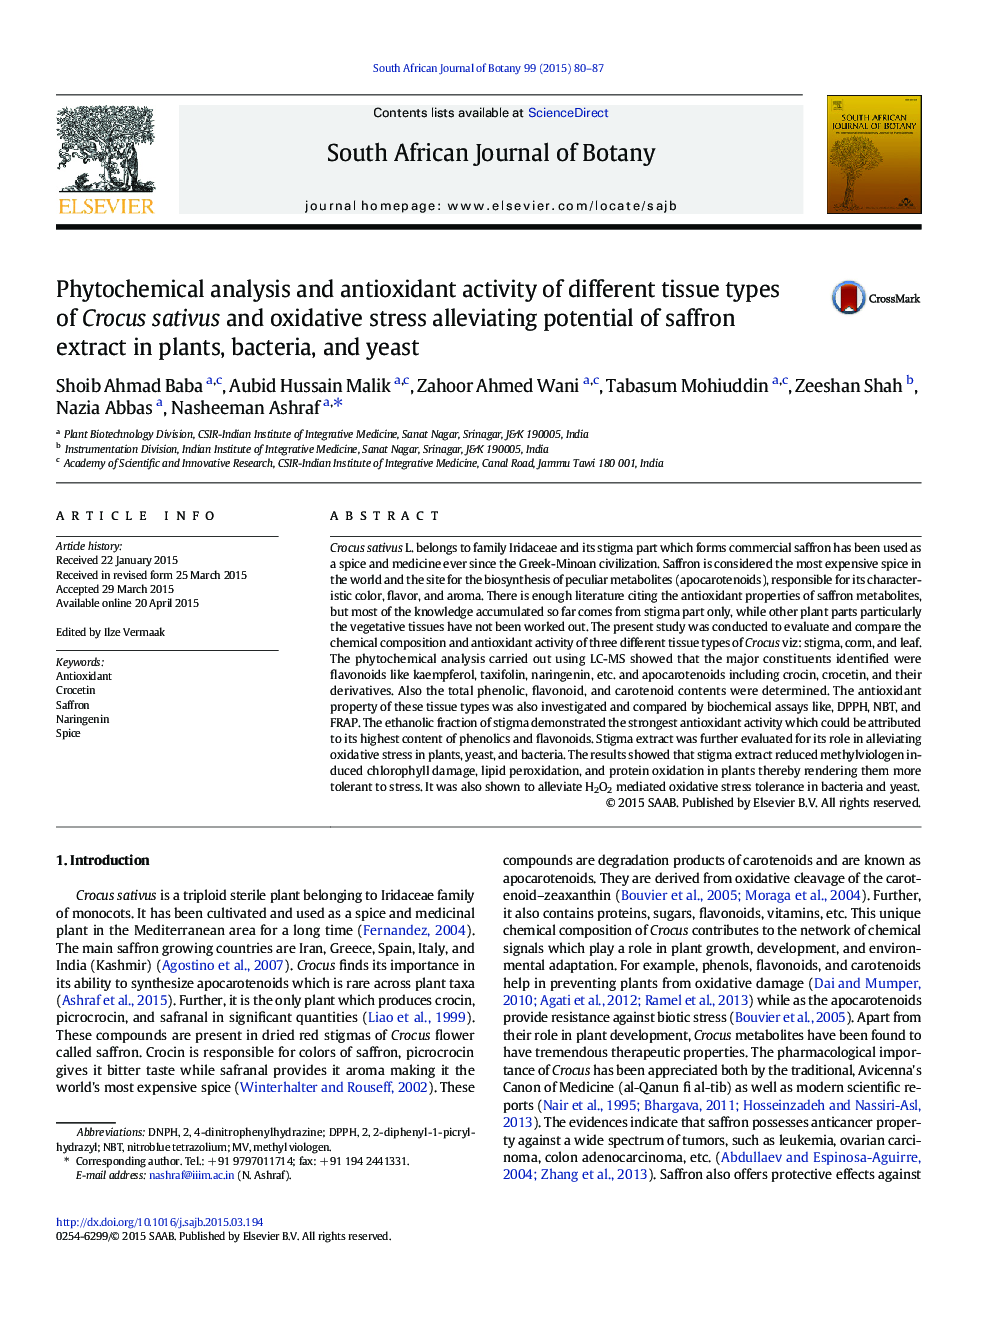 Phytochemical analysis and antioxidant activity of different tissue types of Crocus sativus and oxidative stress alleviating potential of saffron extract in plants, bacteria, and yeast